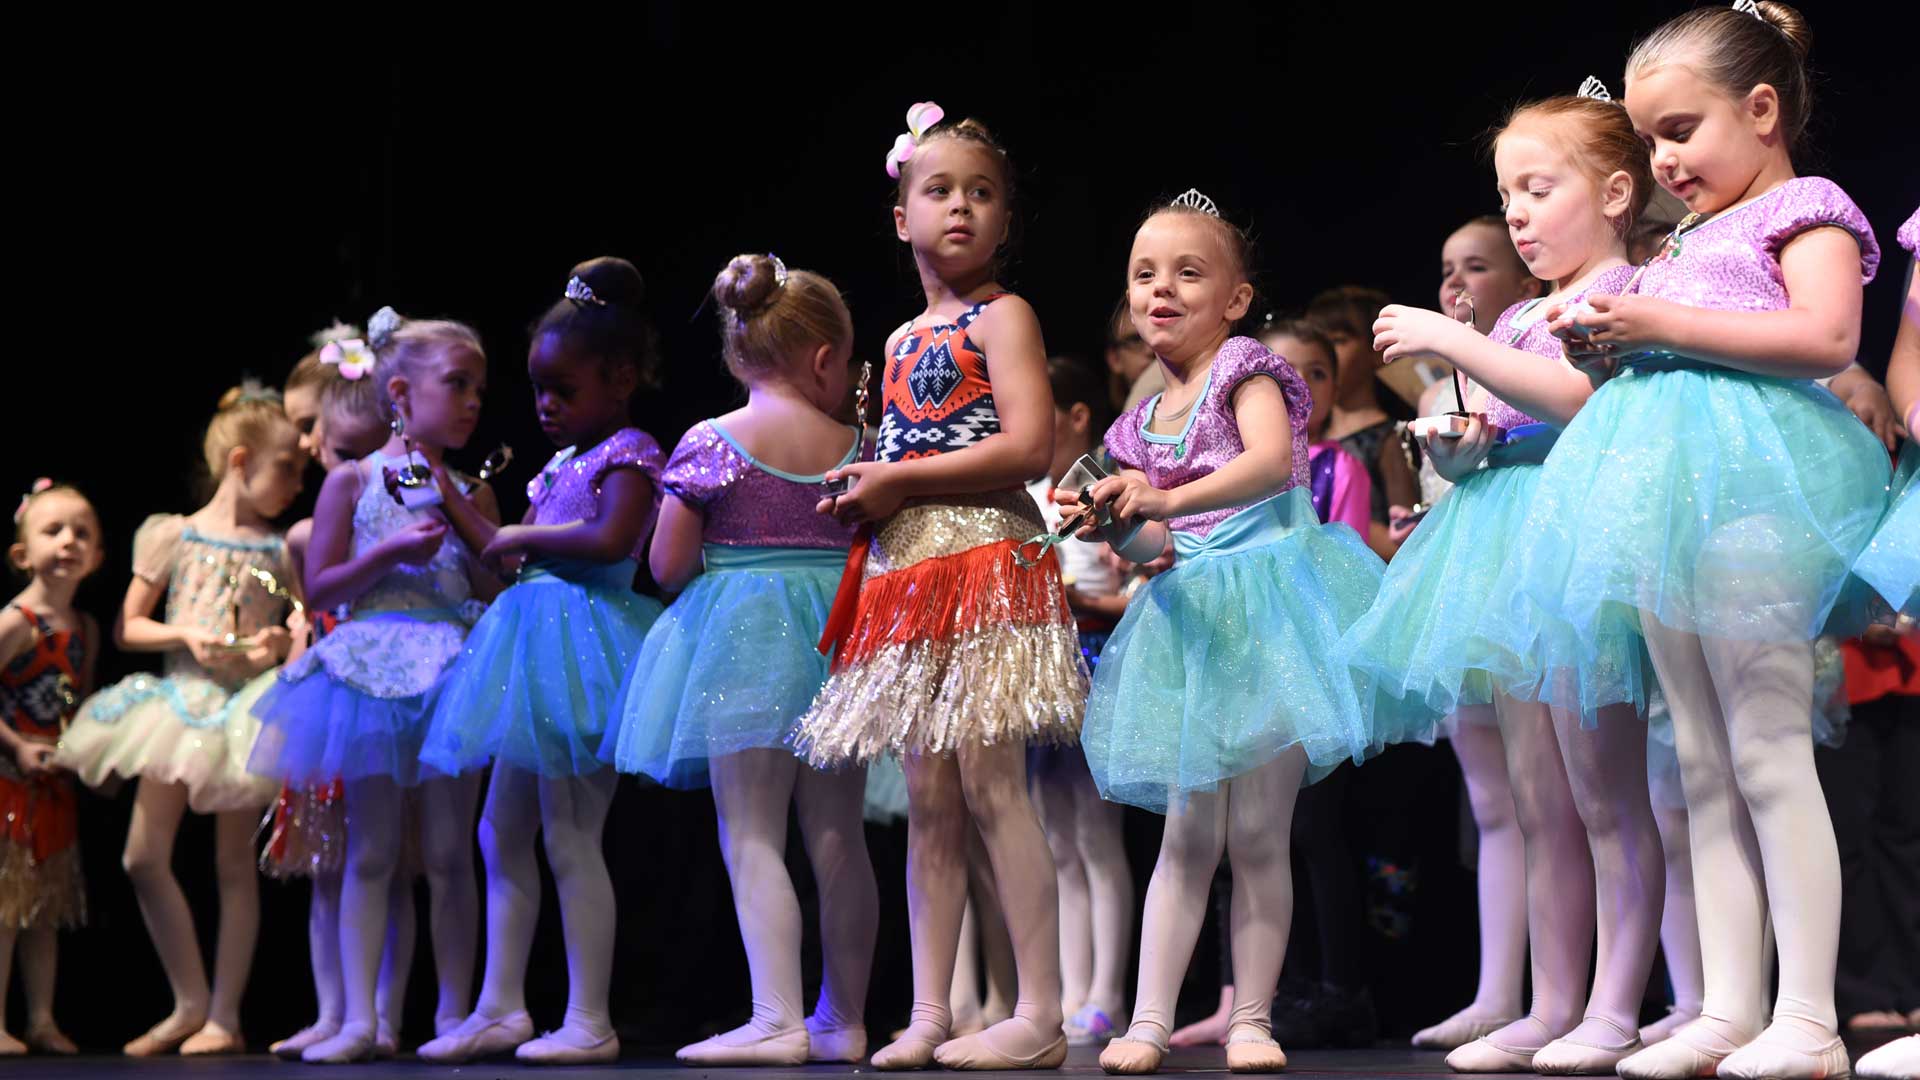 Dance Classes for Kids in Ballet, Tap, Hip-Hop, Musical Theater, Jazz, Modern, Contemporary and more in New Orleans, Mandeville, Covington